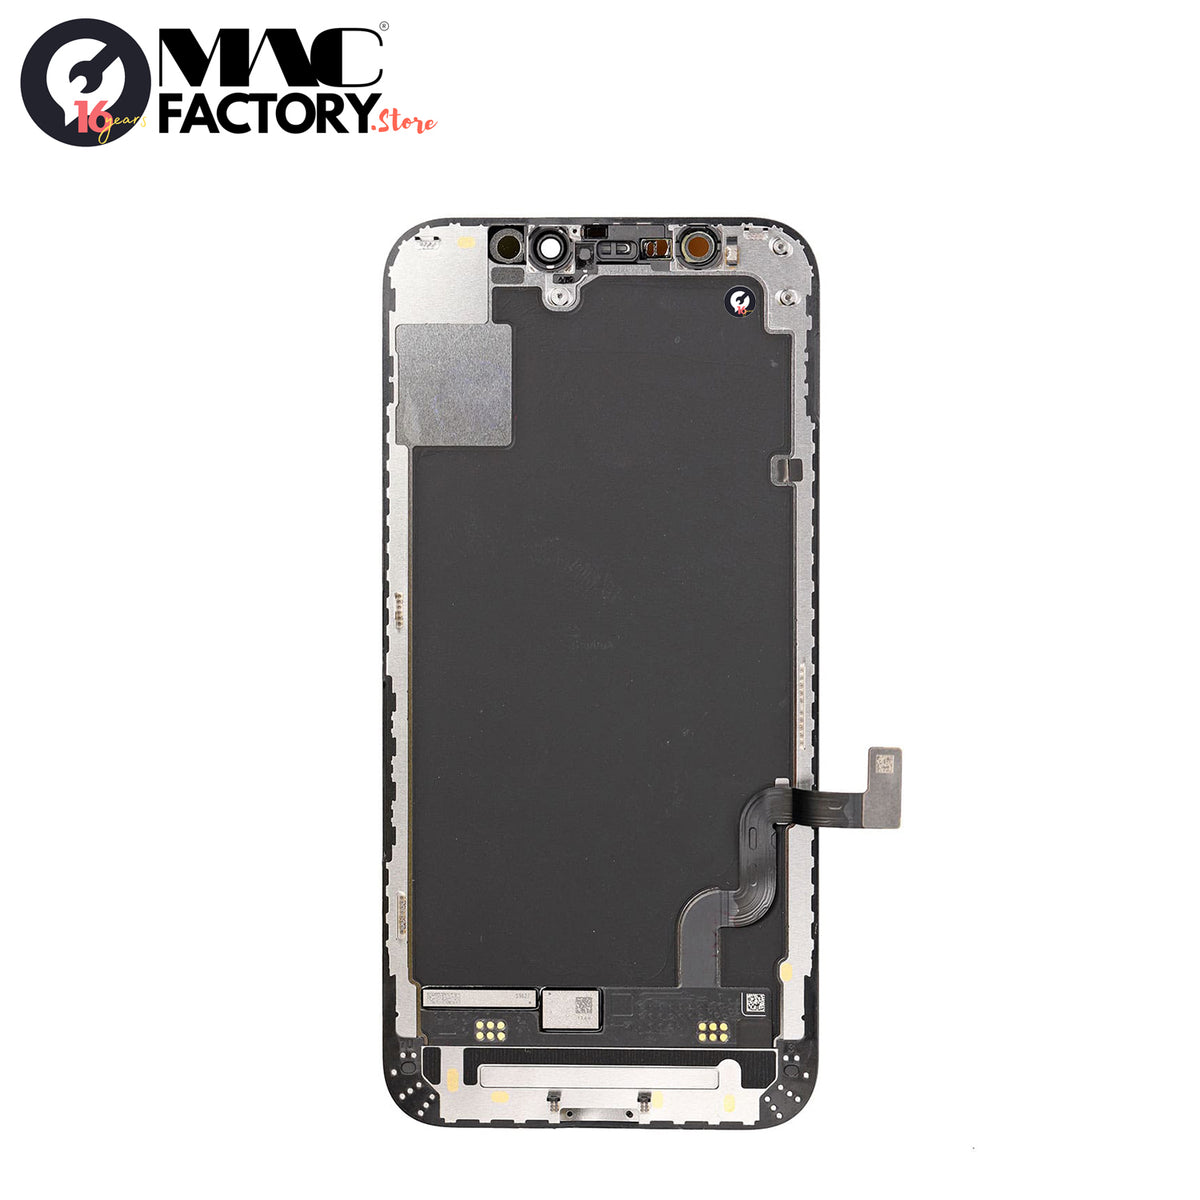 OLED SCREEN DIGITIZER ASSEMBLY  FOR IPHONE 12 MINI- BLACK